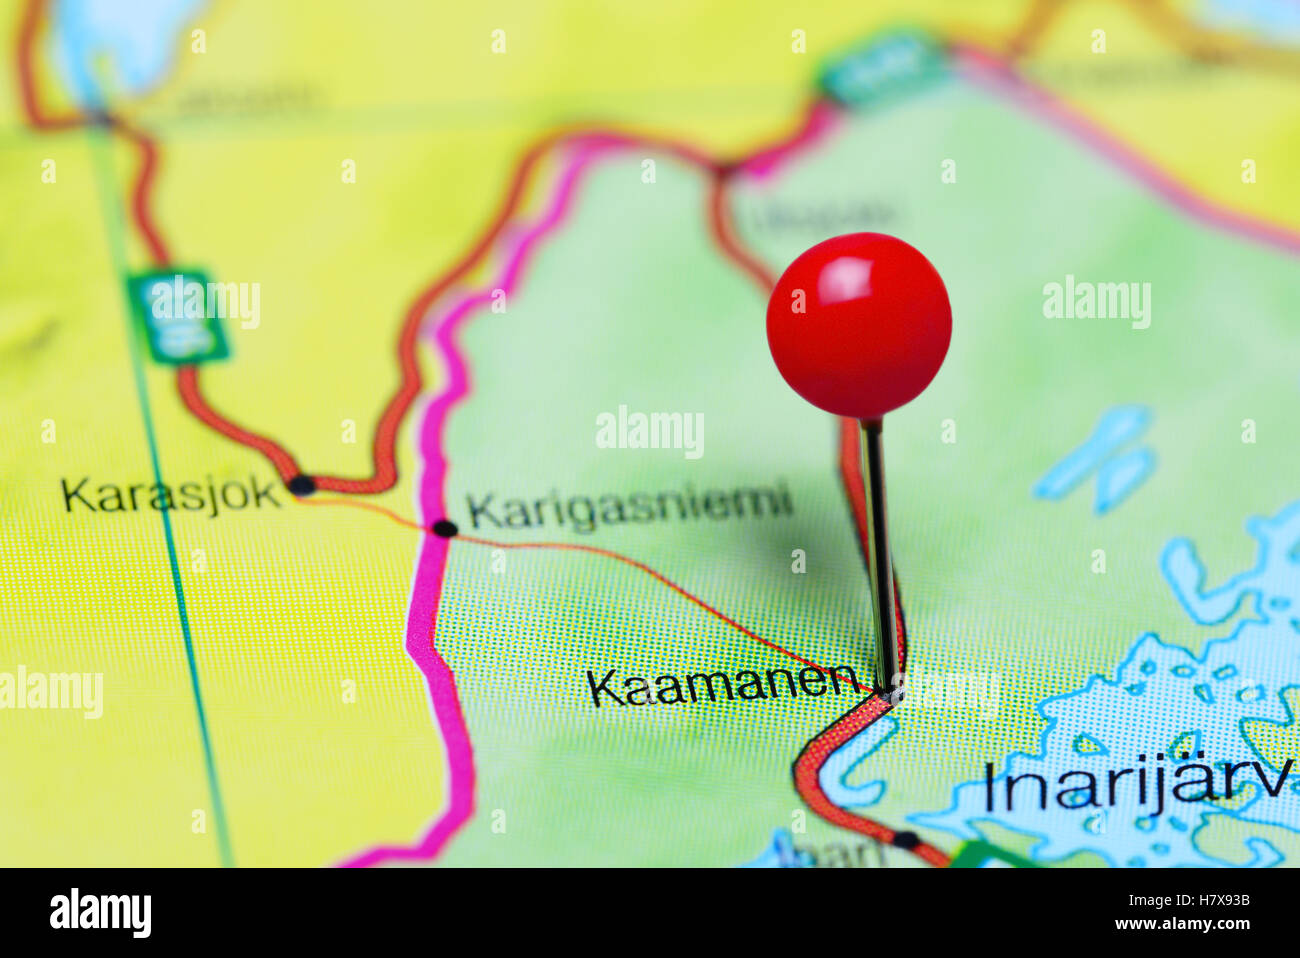 Kaamanen pinned on a map of Finland Stock Photo